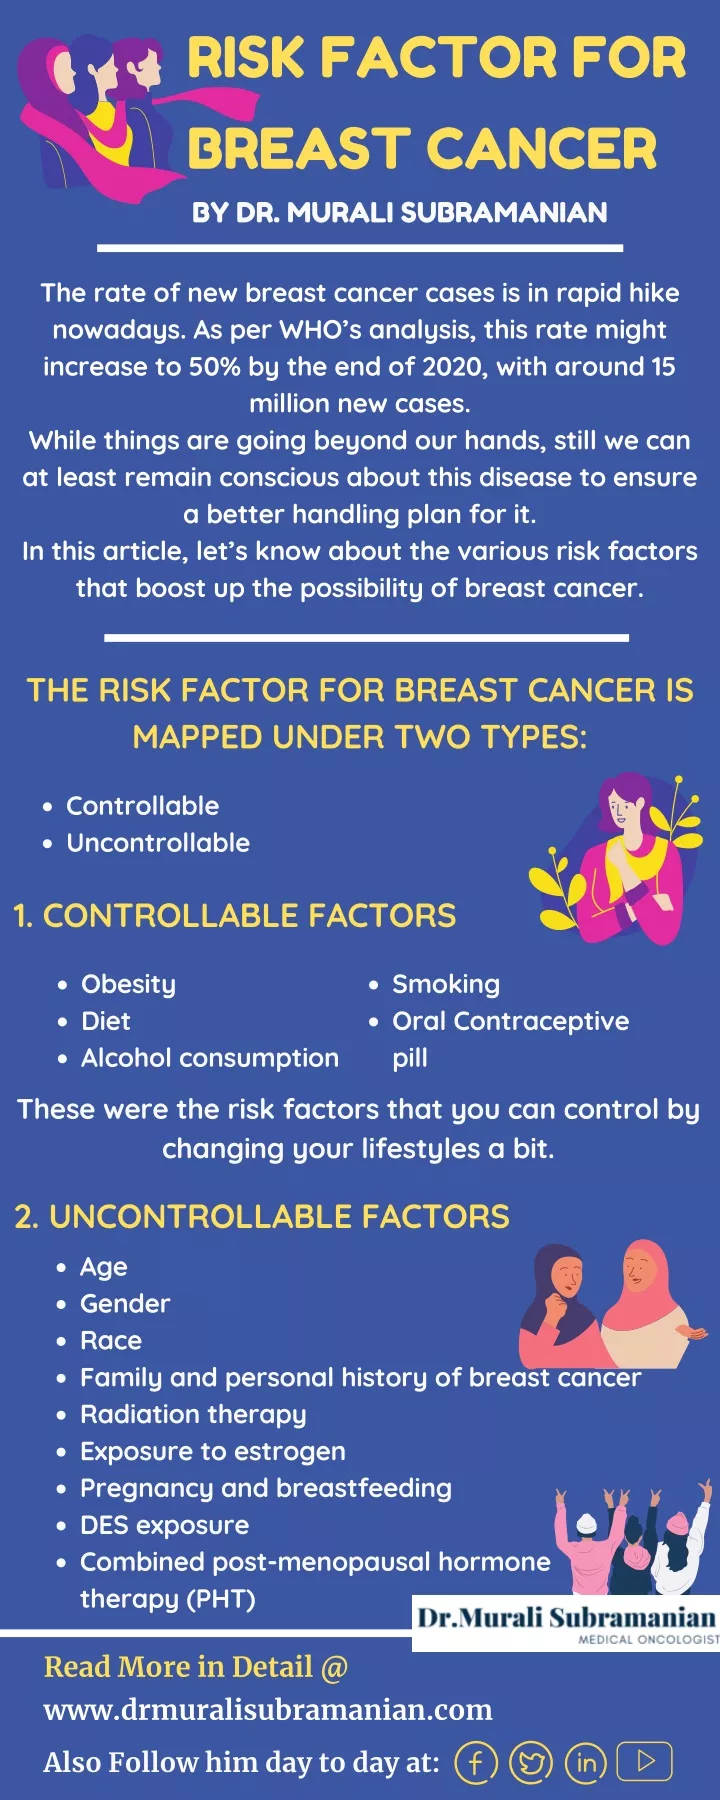 risk factor for breast cancer by dr murali